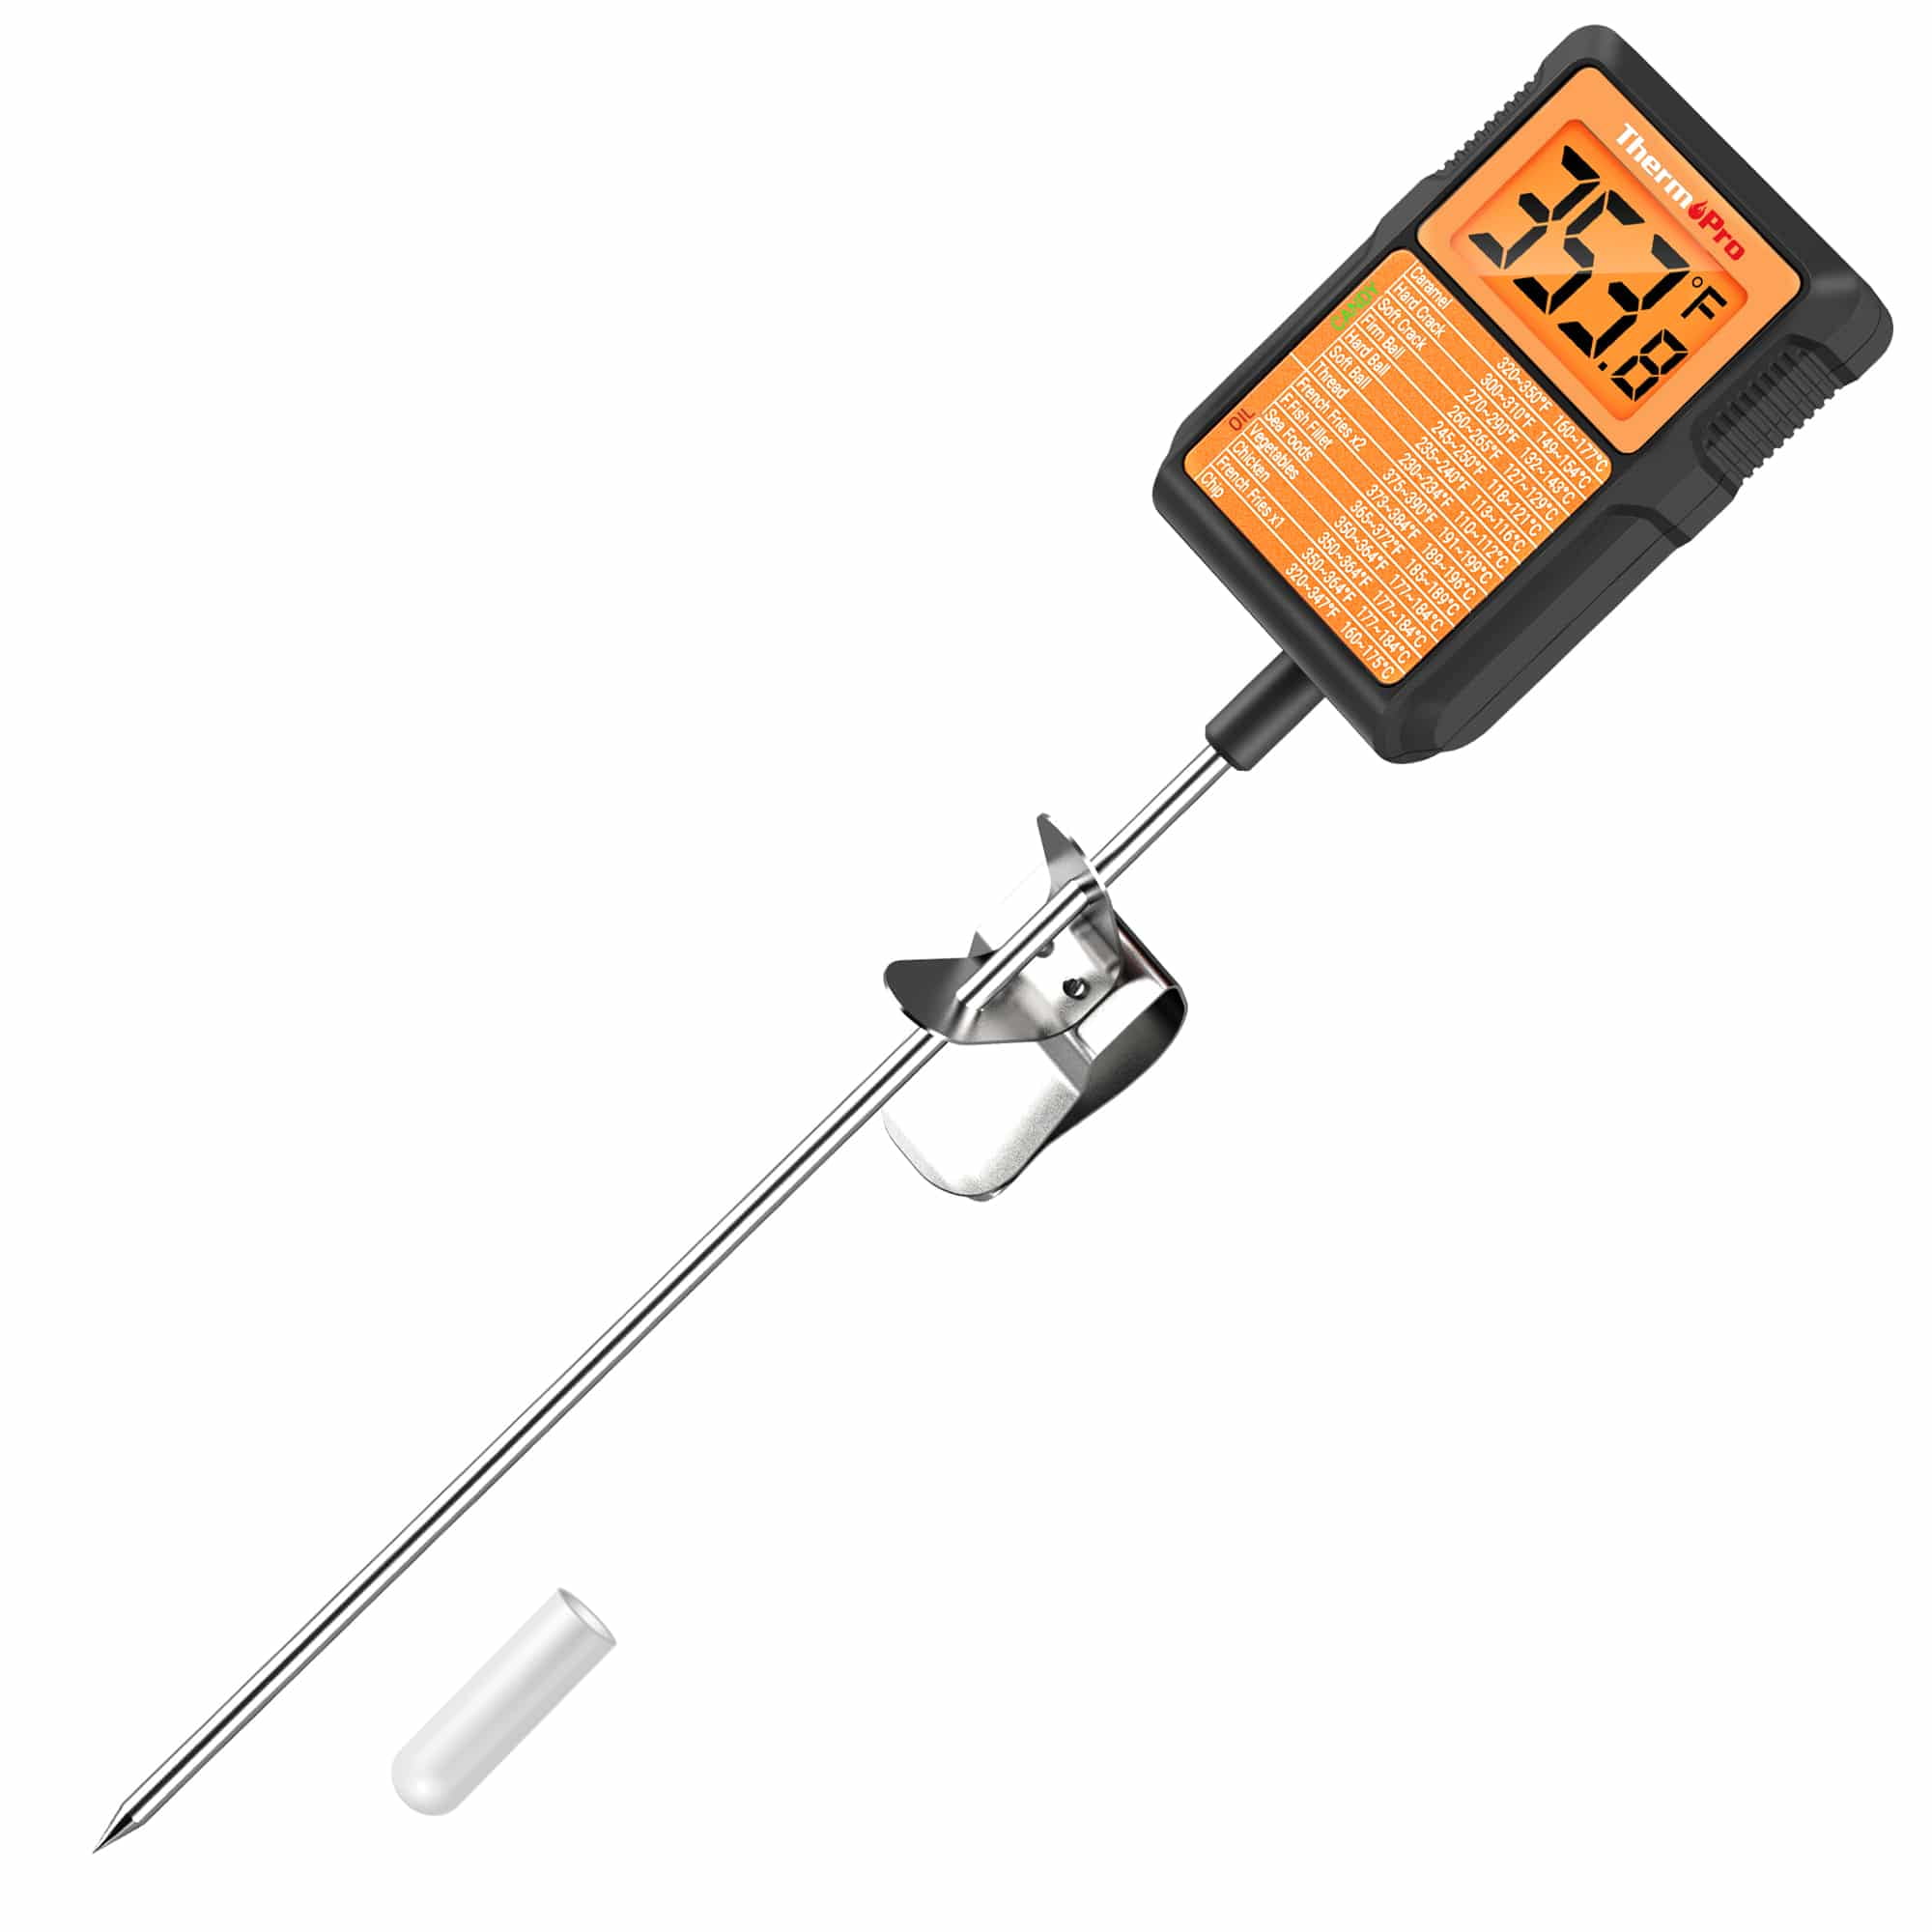 ThermoPro TP511 Digital Candy Thermometer with Pot Clip, Programmable  Instant Read Food Meat Thermometer with 8'' Long Probe for Smoker Baking